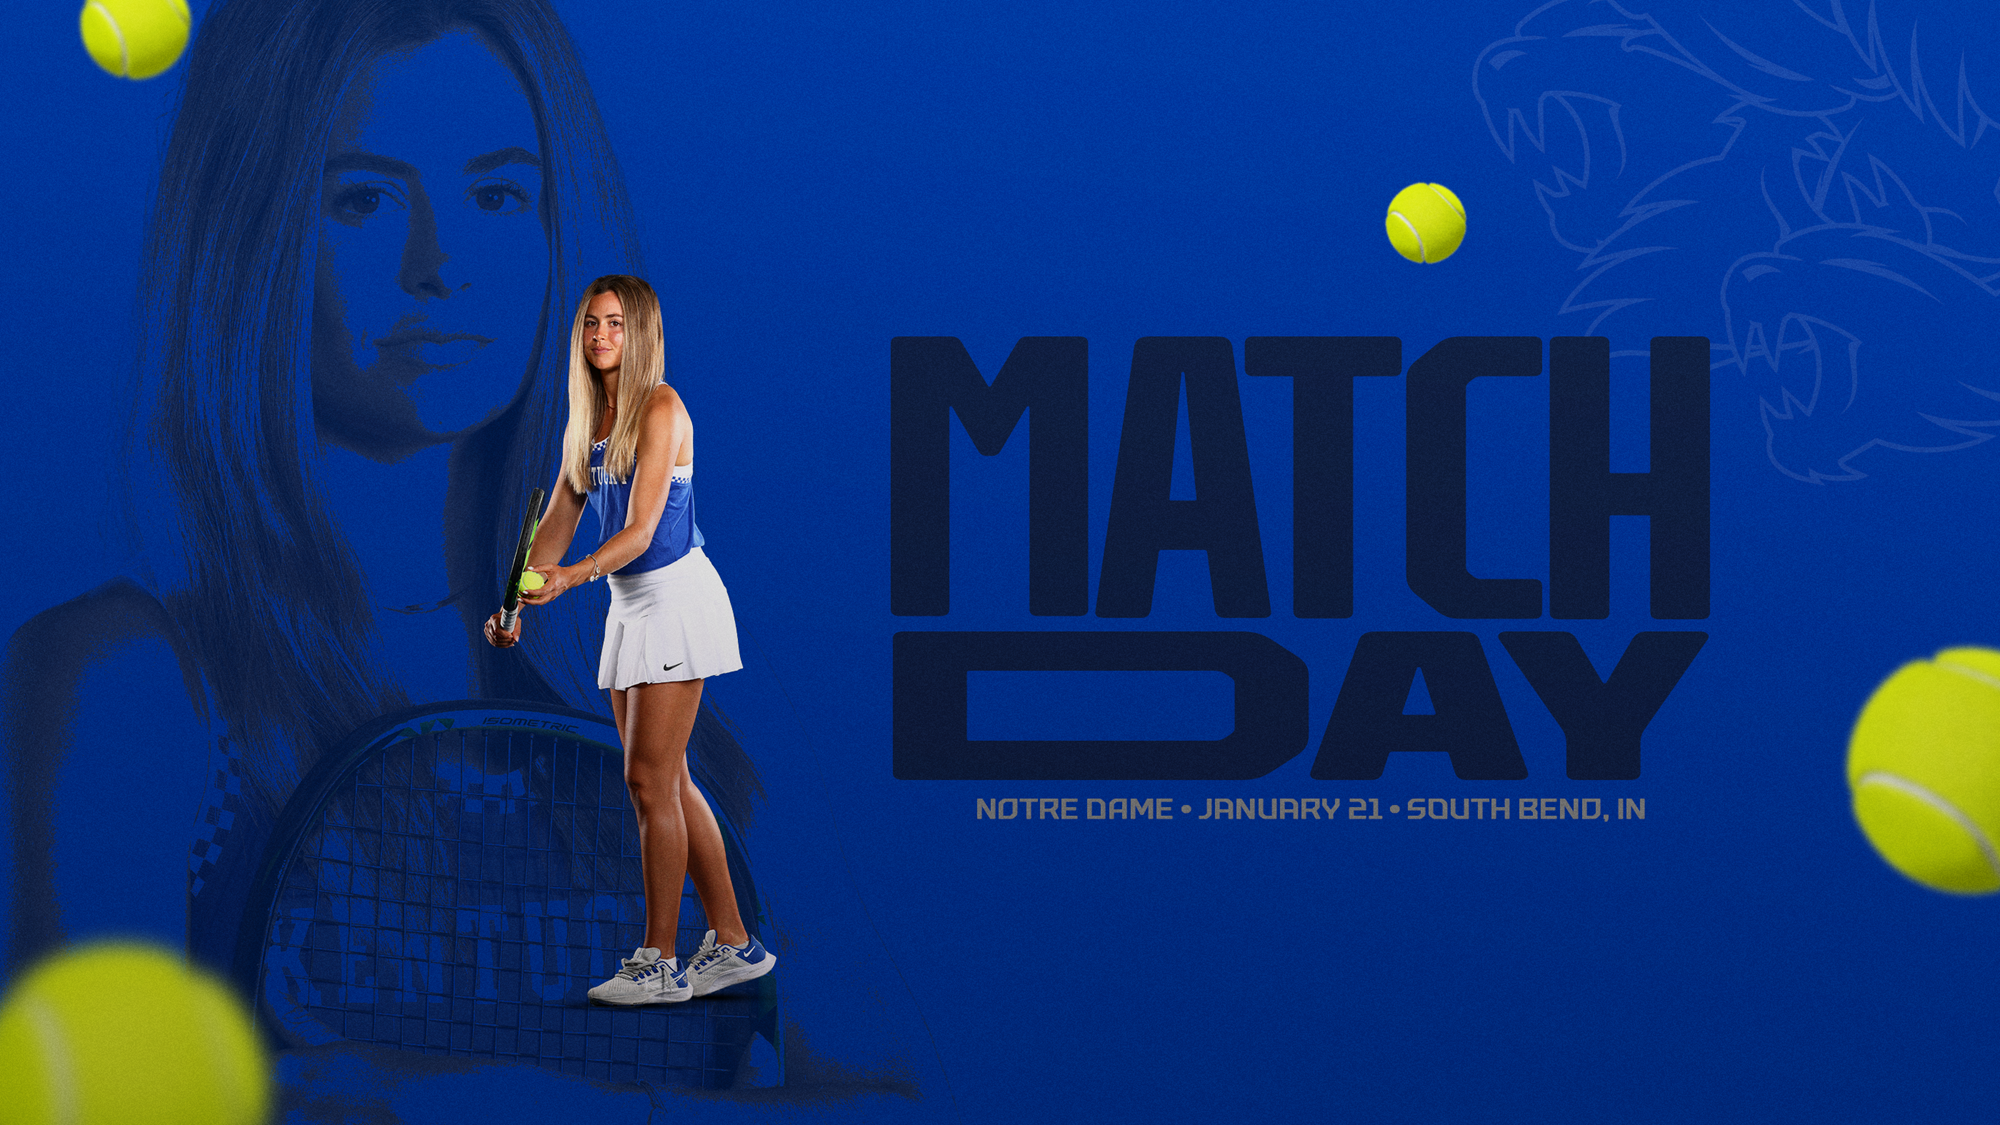 UK Women’s Tennis Faces First Road Test at Notre Dame on Friday